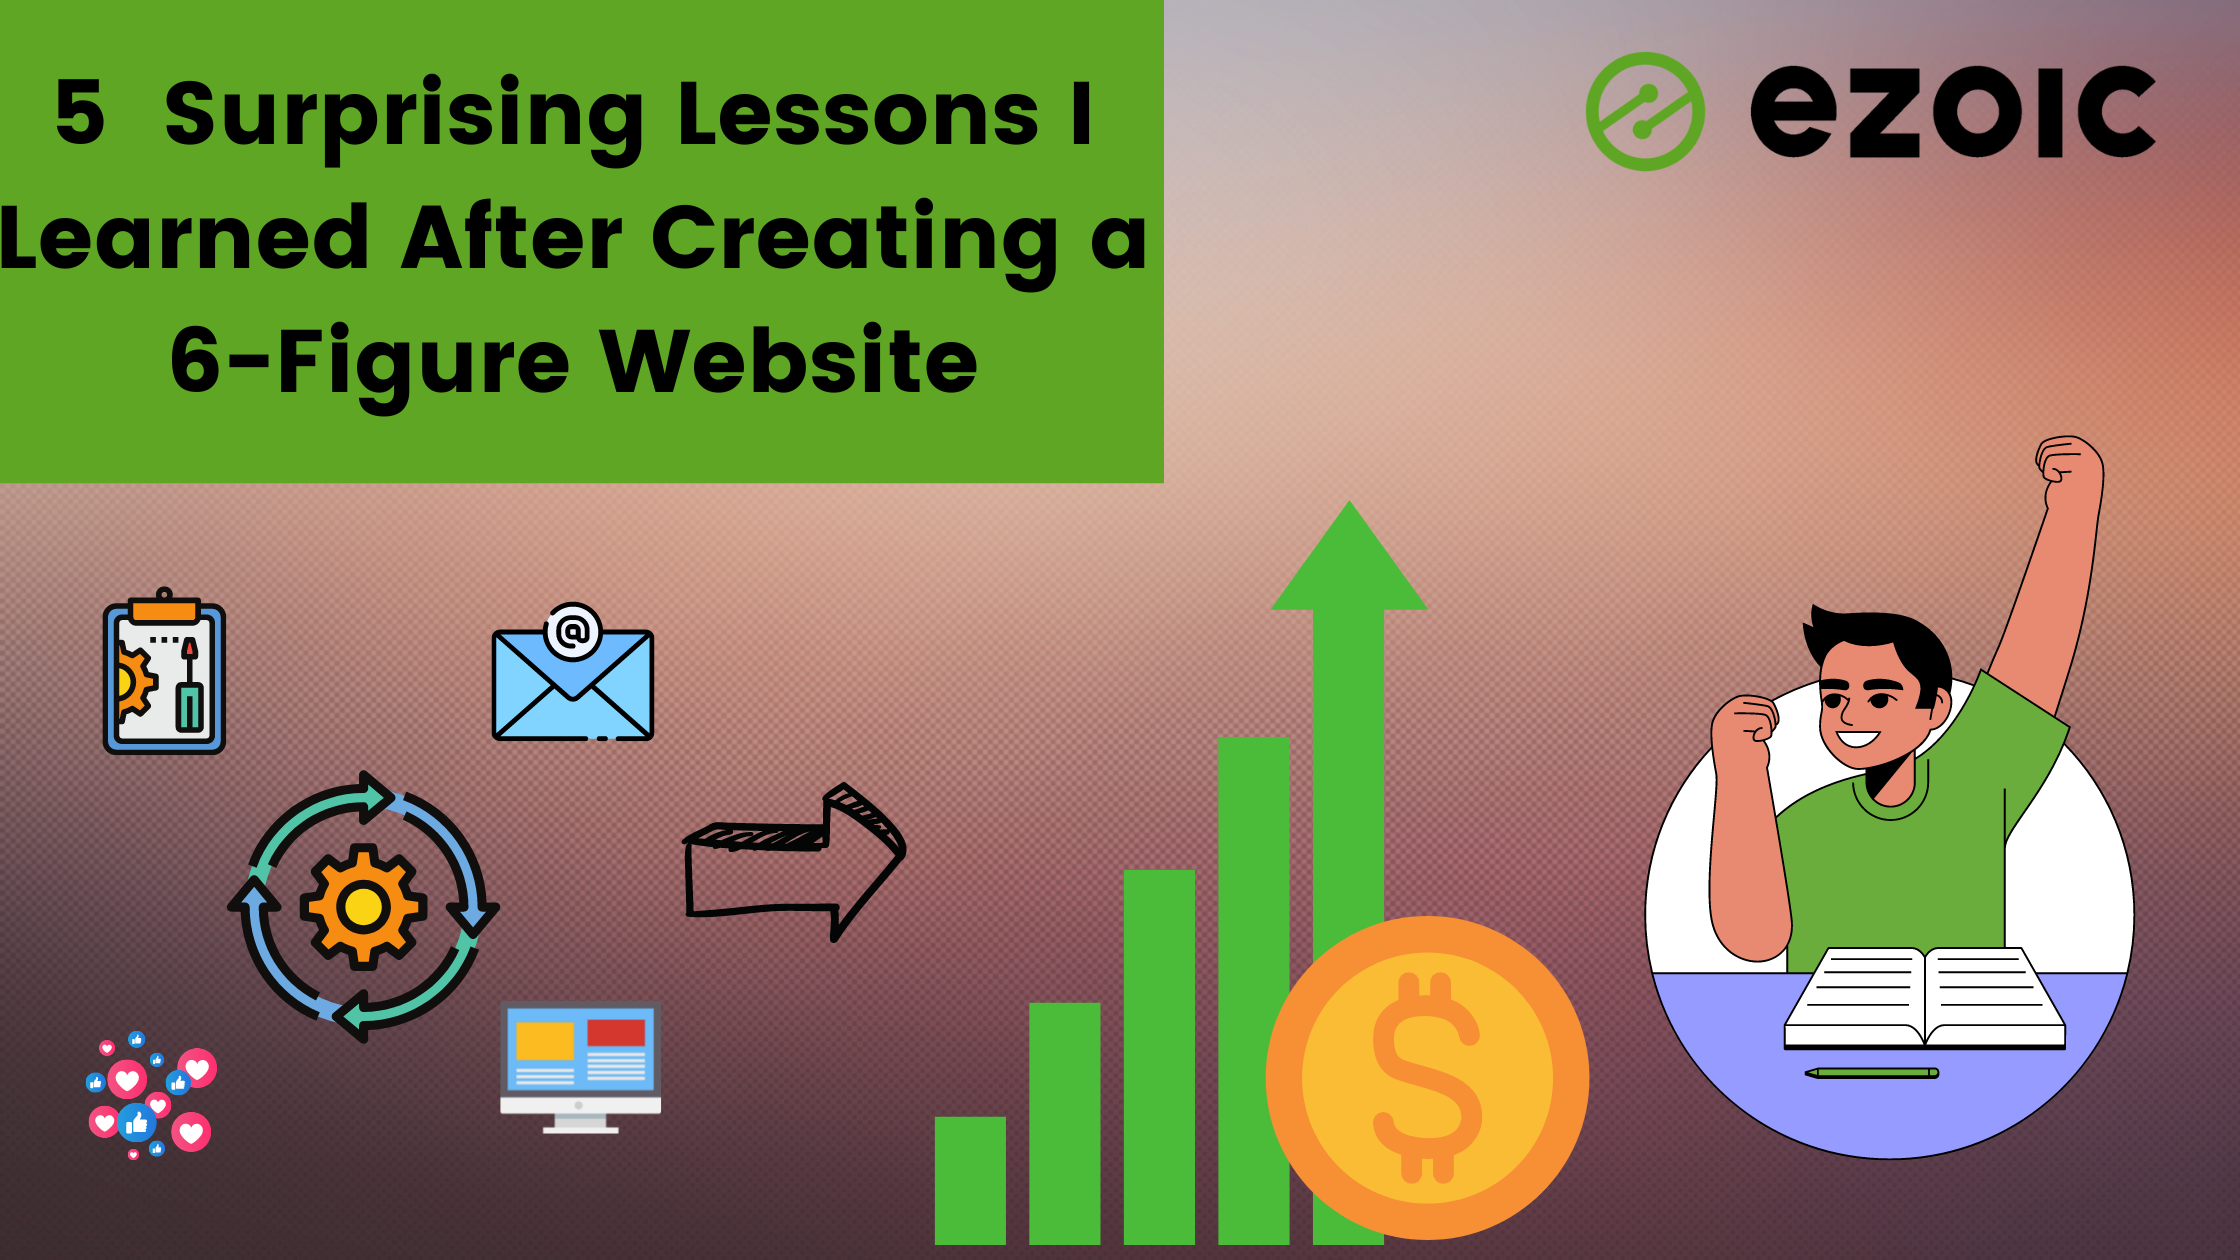 The 5 Most Surprising Lessons I Learned After Creating a 6-Figure Website